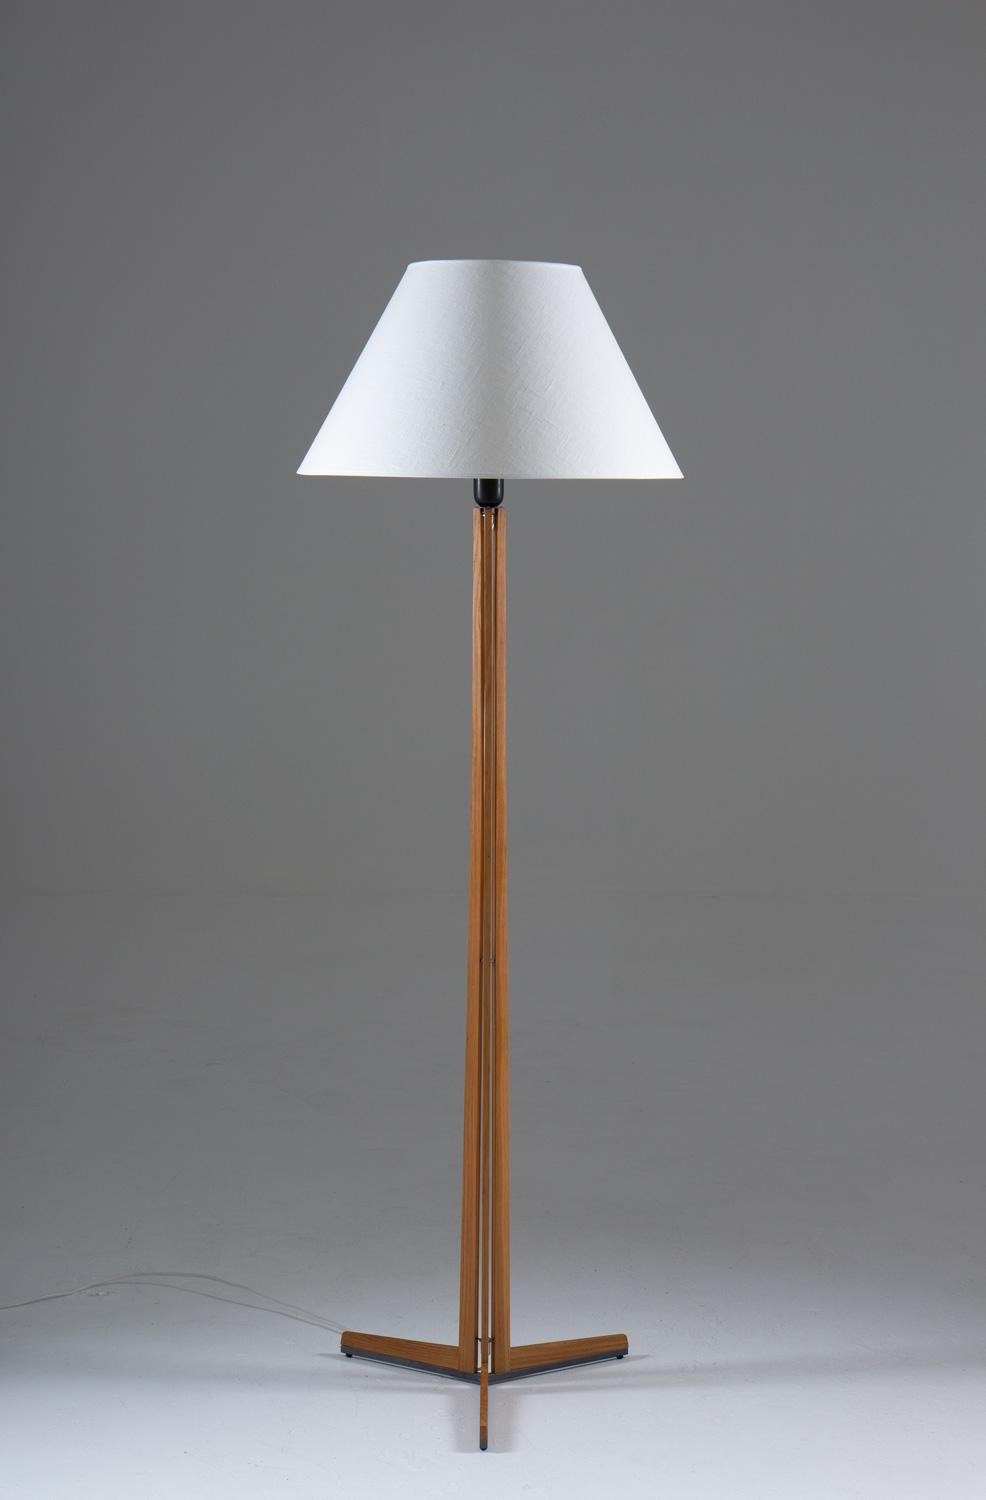 Add a touch of midcentury style to your home with this Scandinavian tripod floor lamp, believed to have been manufactured in the 1960s. The lamp features a wooden and metal construction, with beautiful details such as the tripod metal base and